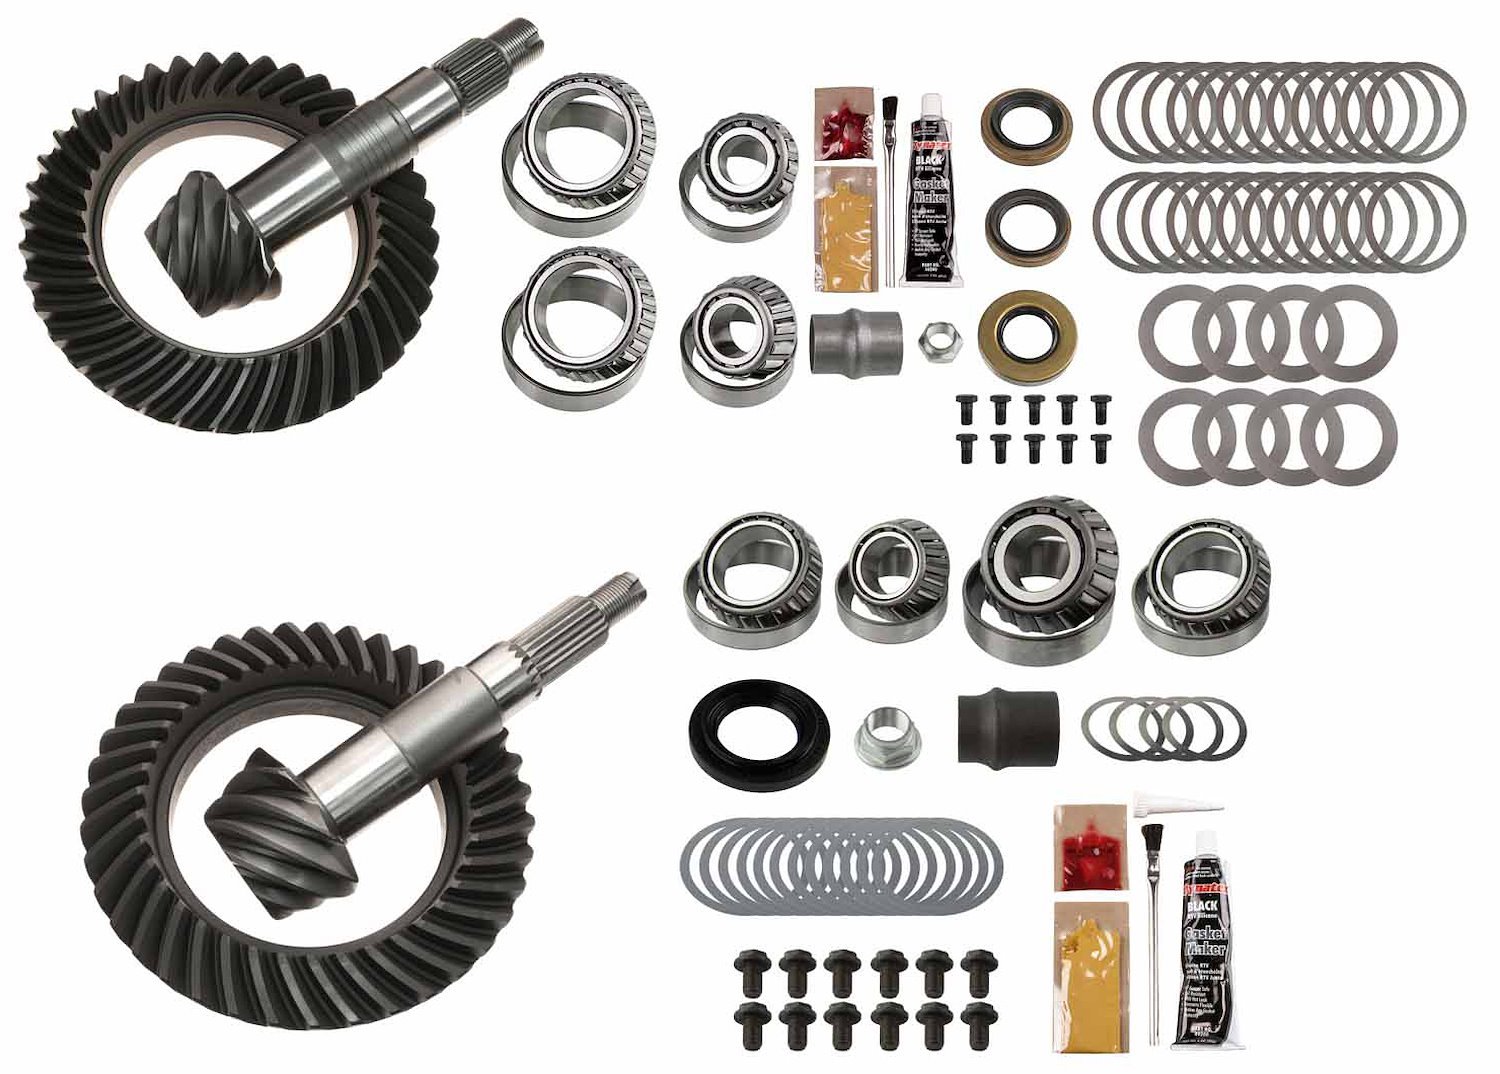 Complete Front and Rear Ring and Pinion Kit 1995-04 Toyota Tacoma, 2000-06 Toyota Tundra, 2001-2007 Toyota Sequoia - 5.29 Ratio